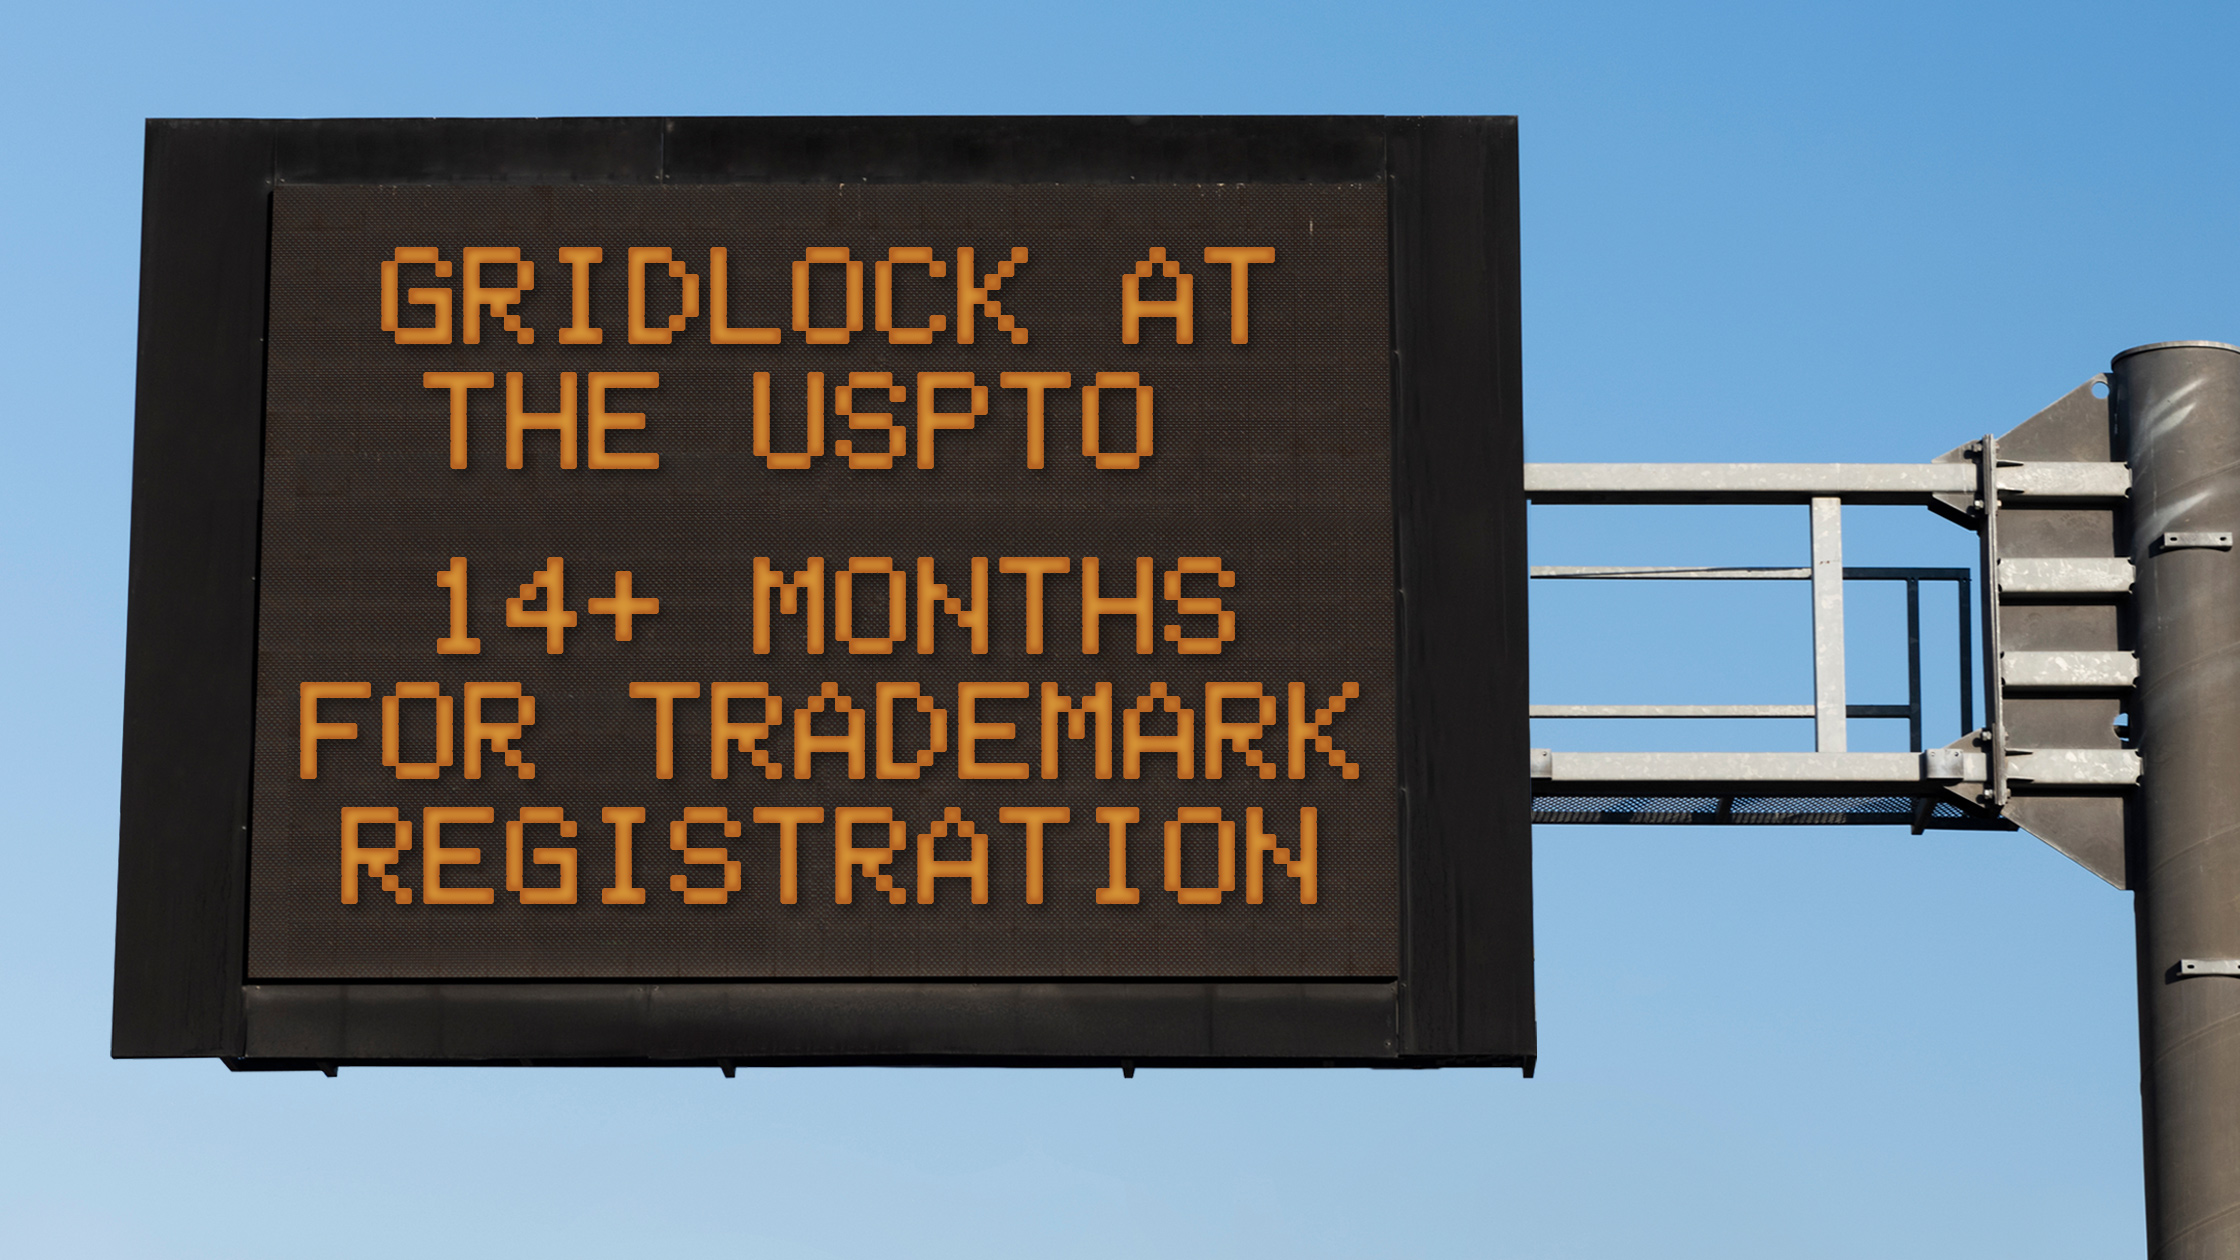 Digital Road Sign with the warning: "Gridlock at the USPTO 14+ Months for Trademark Registration"